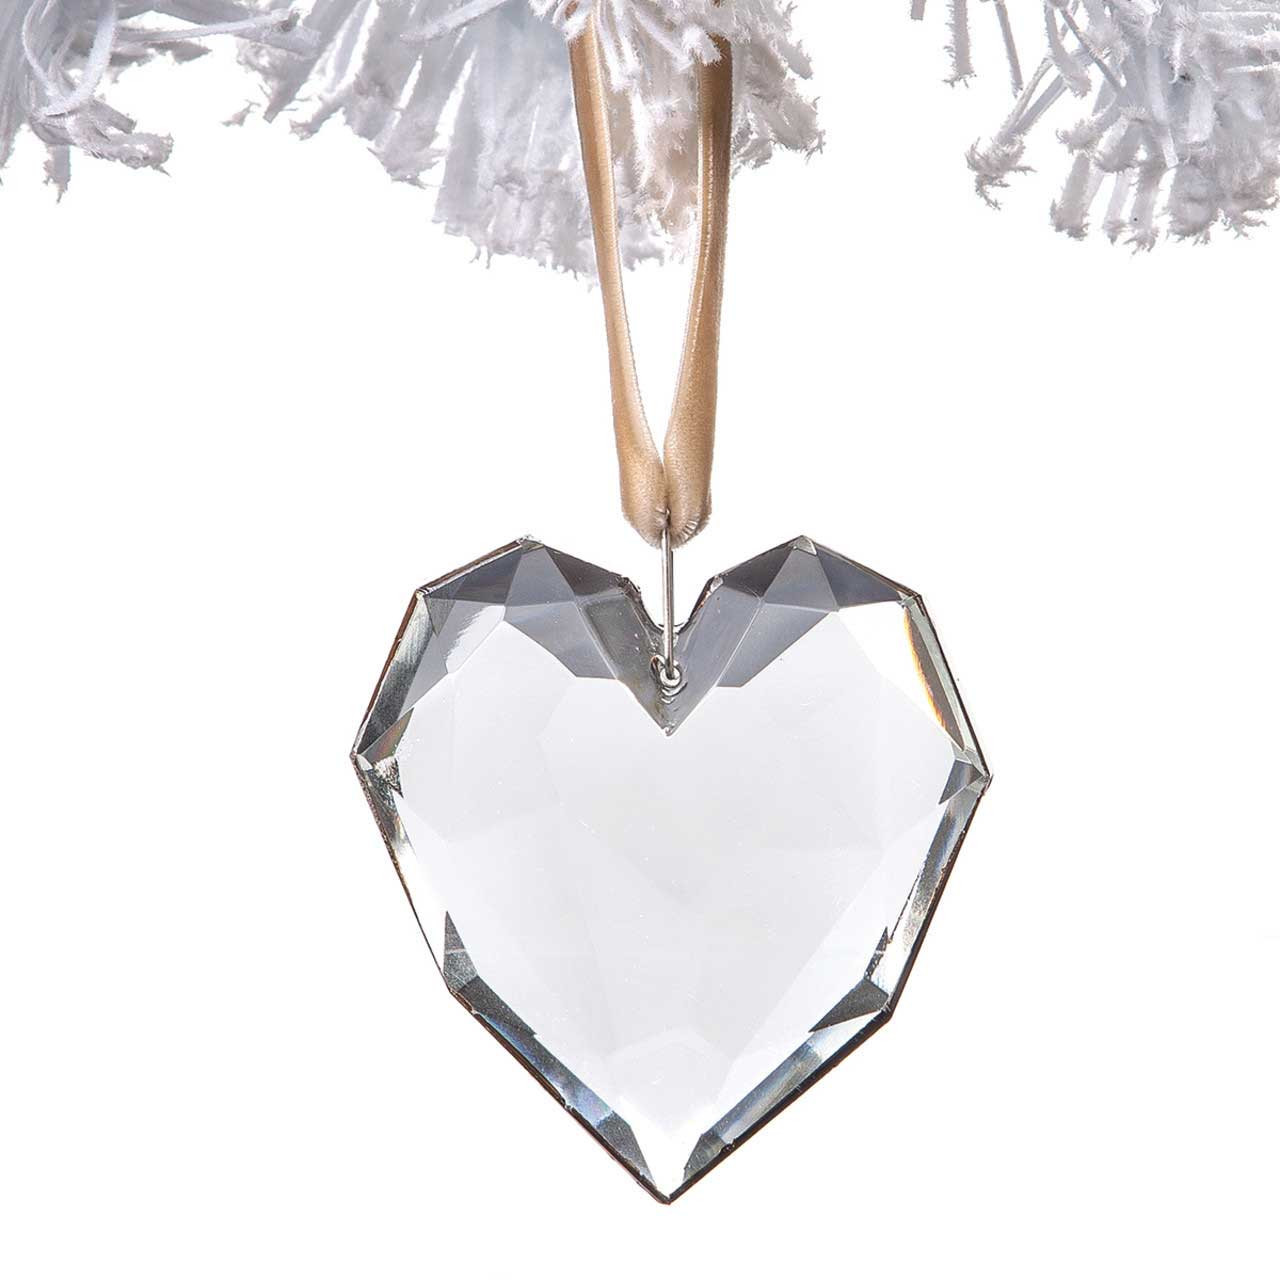 Faceted Glass Heart Ornament